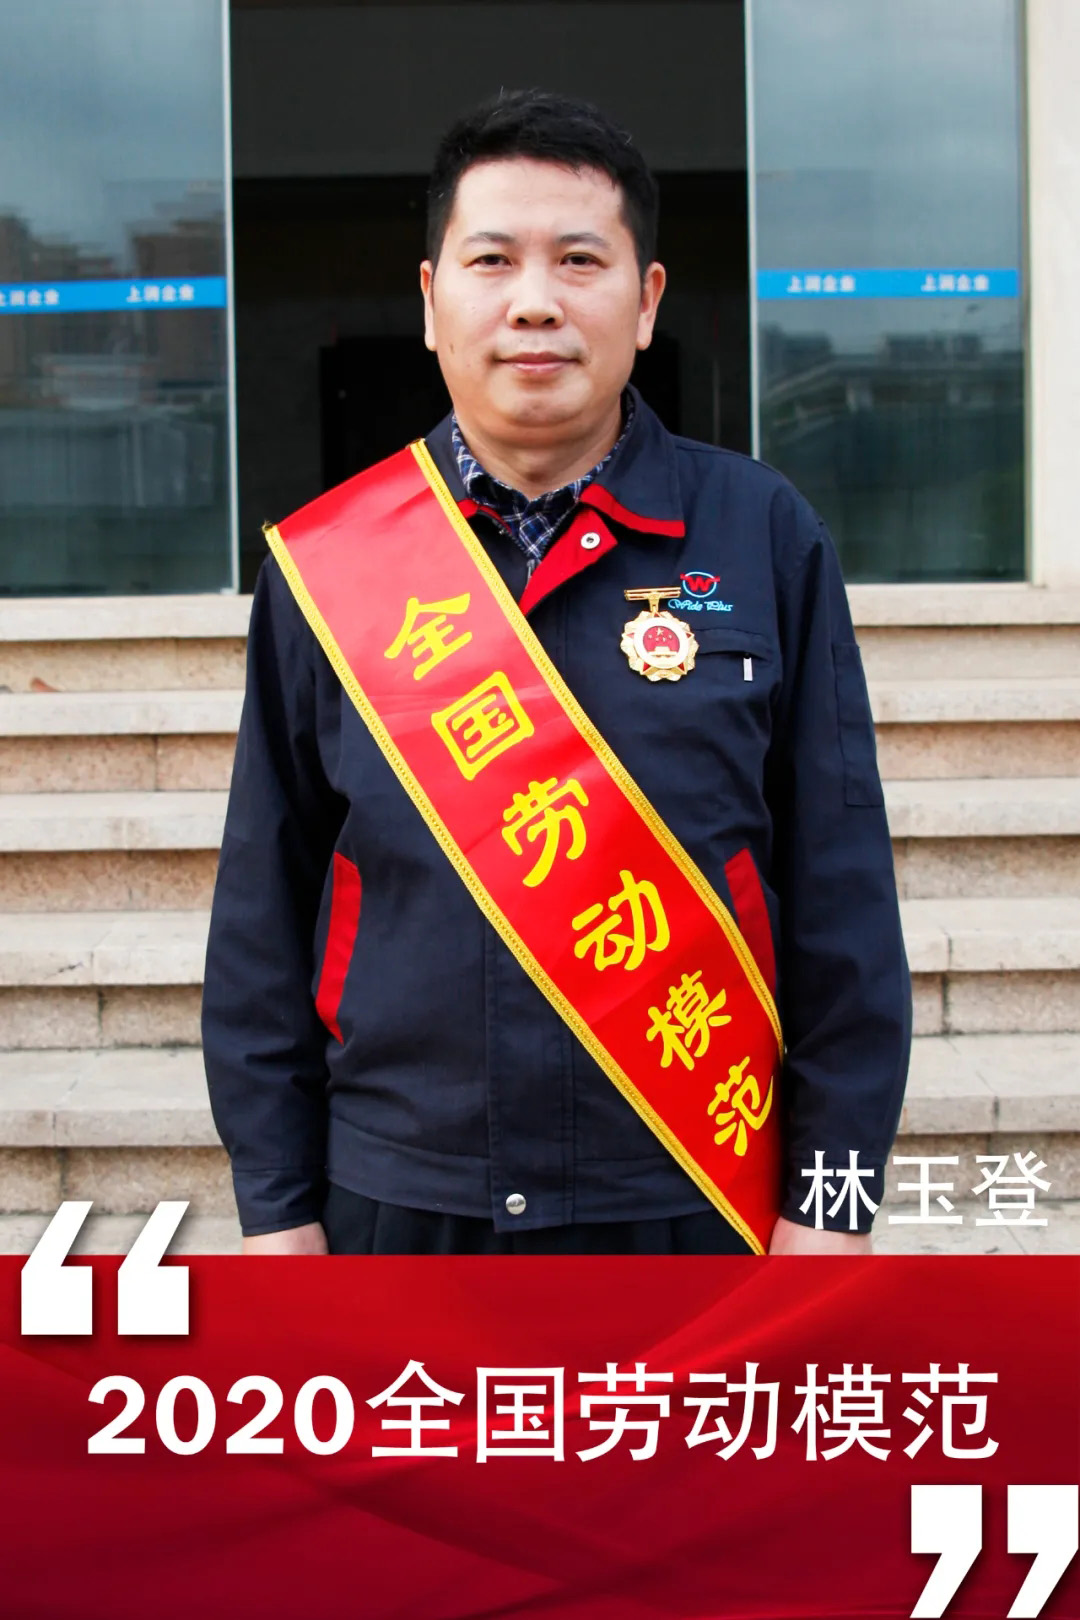 Lin Yudeng of WIDE PLUS, Fujian province was awarded the honorary title of“National model worker”